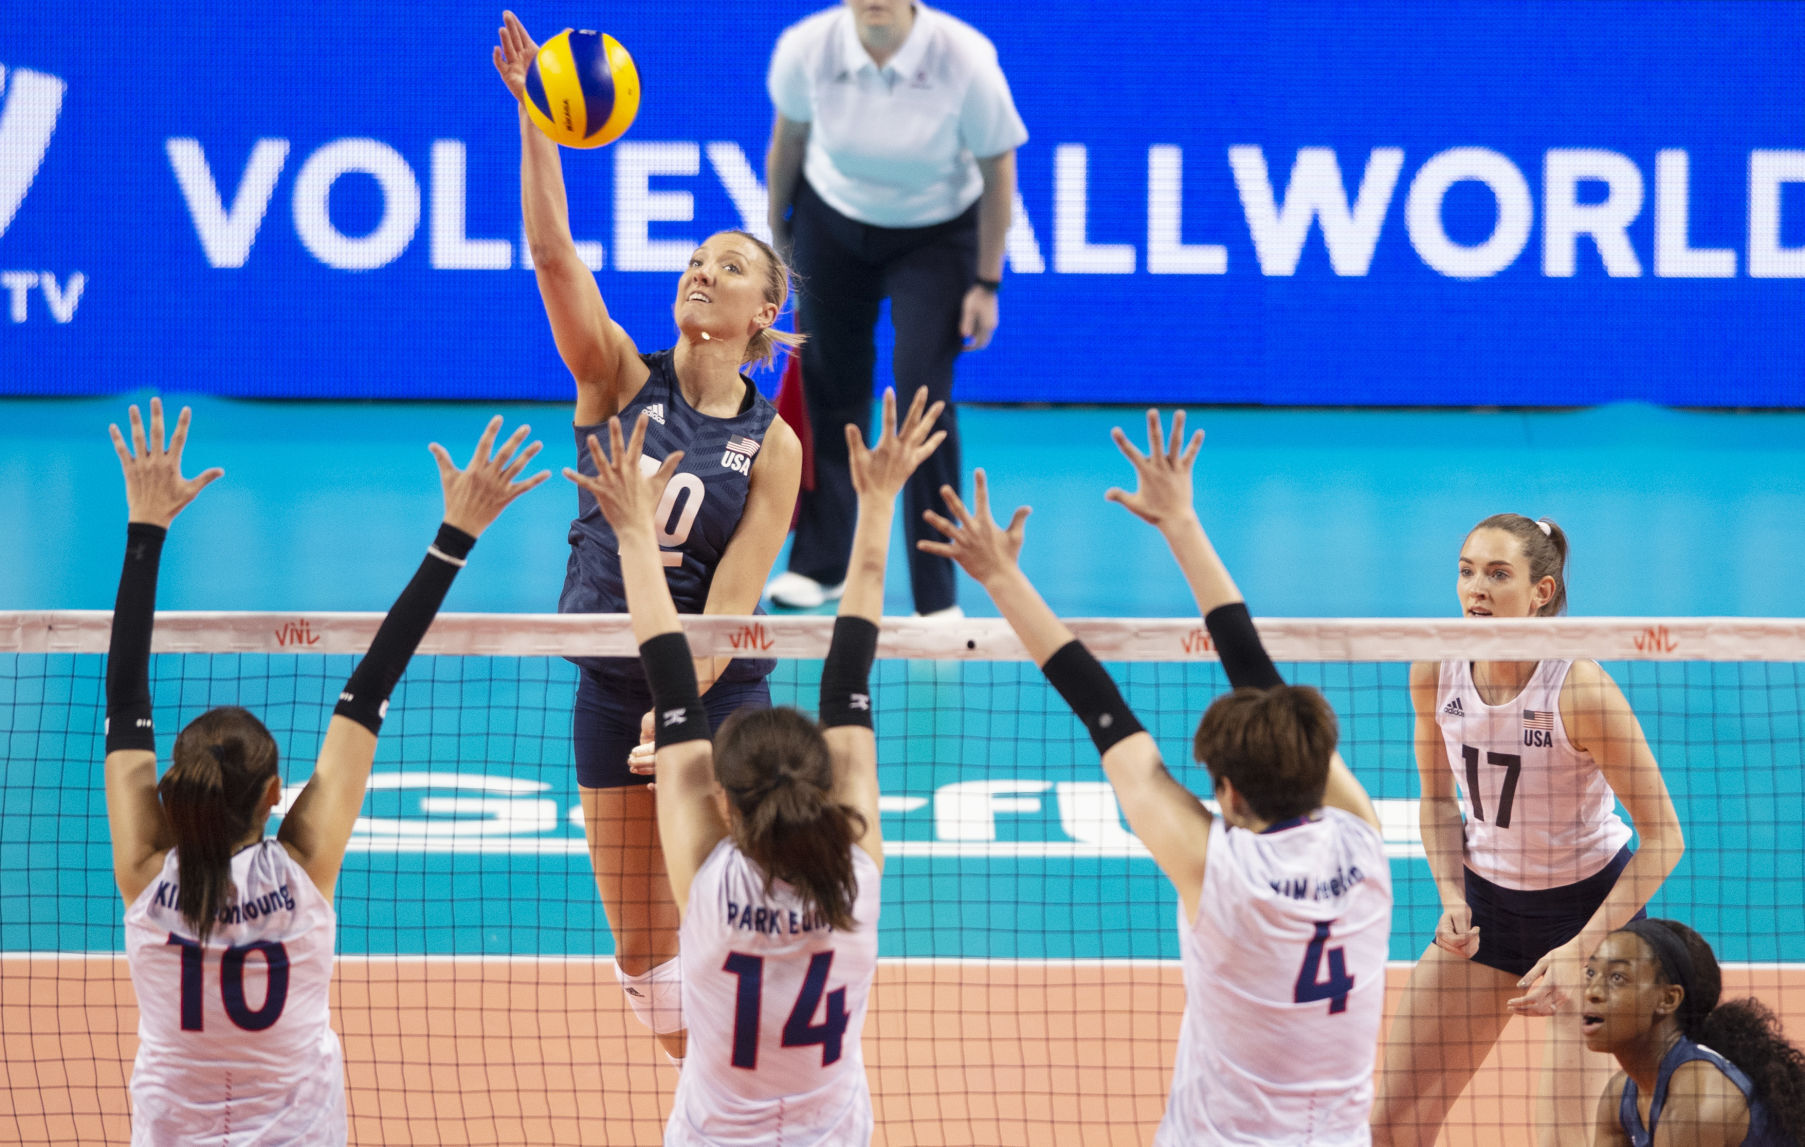 Americans still undefeated at FIVB Volleyball Nations League